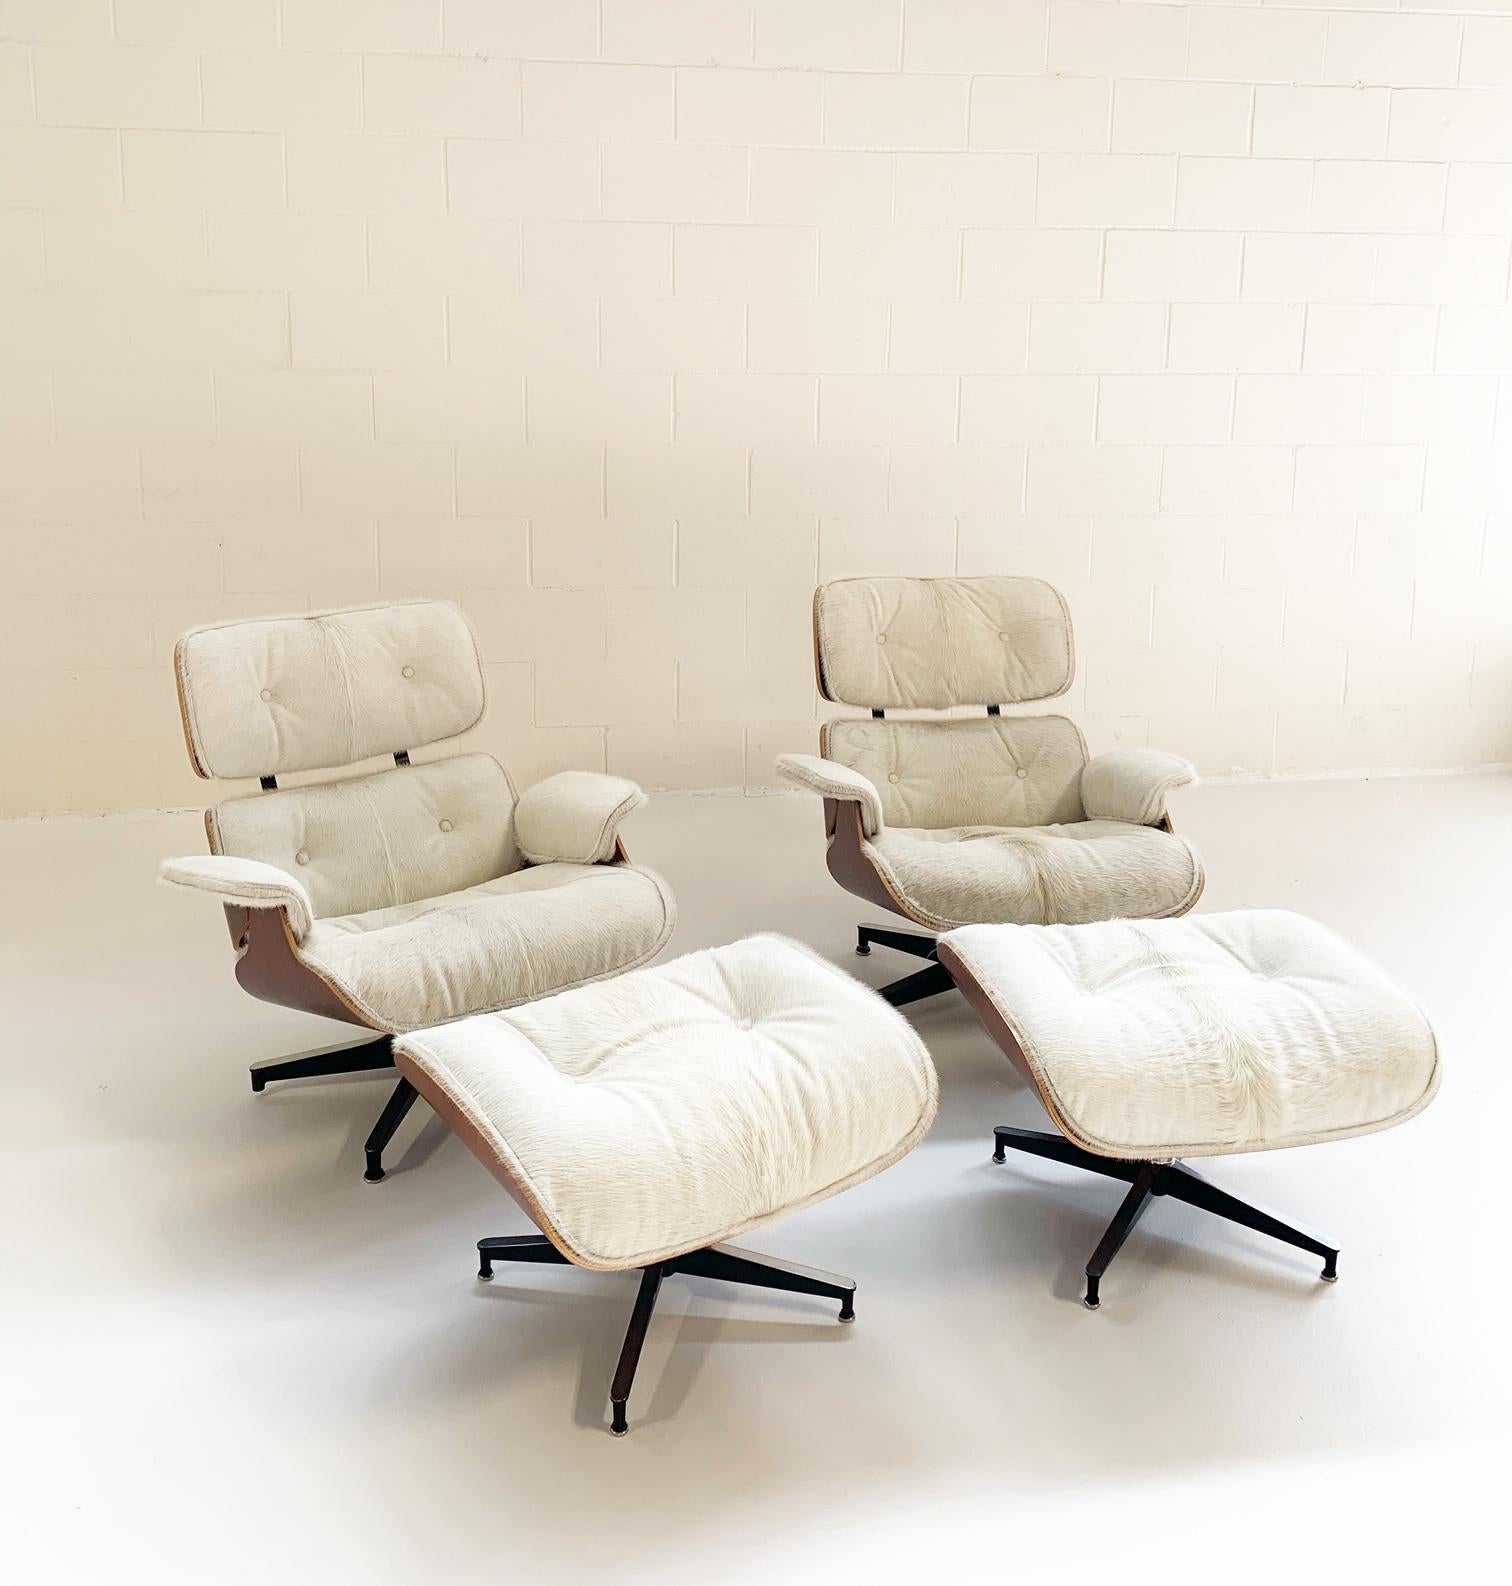 Charles and Ray Eames for Herman Miller 670 Lounge Chairs and 671 Ottomans Restored in Brazilian Cowhide

It's always on wish lists. The iconic Eames lounge and ottoman. We restored this pair in our signature Brazilian cowhide in the most lovely